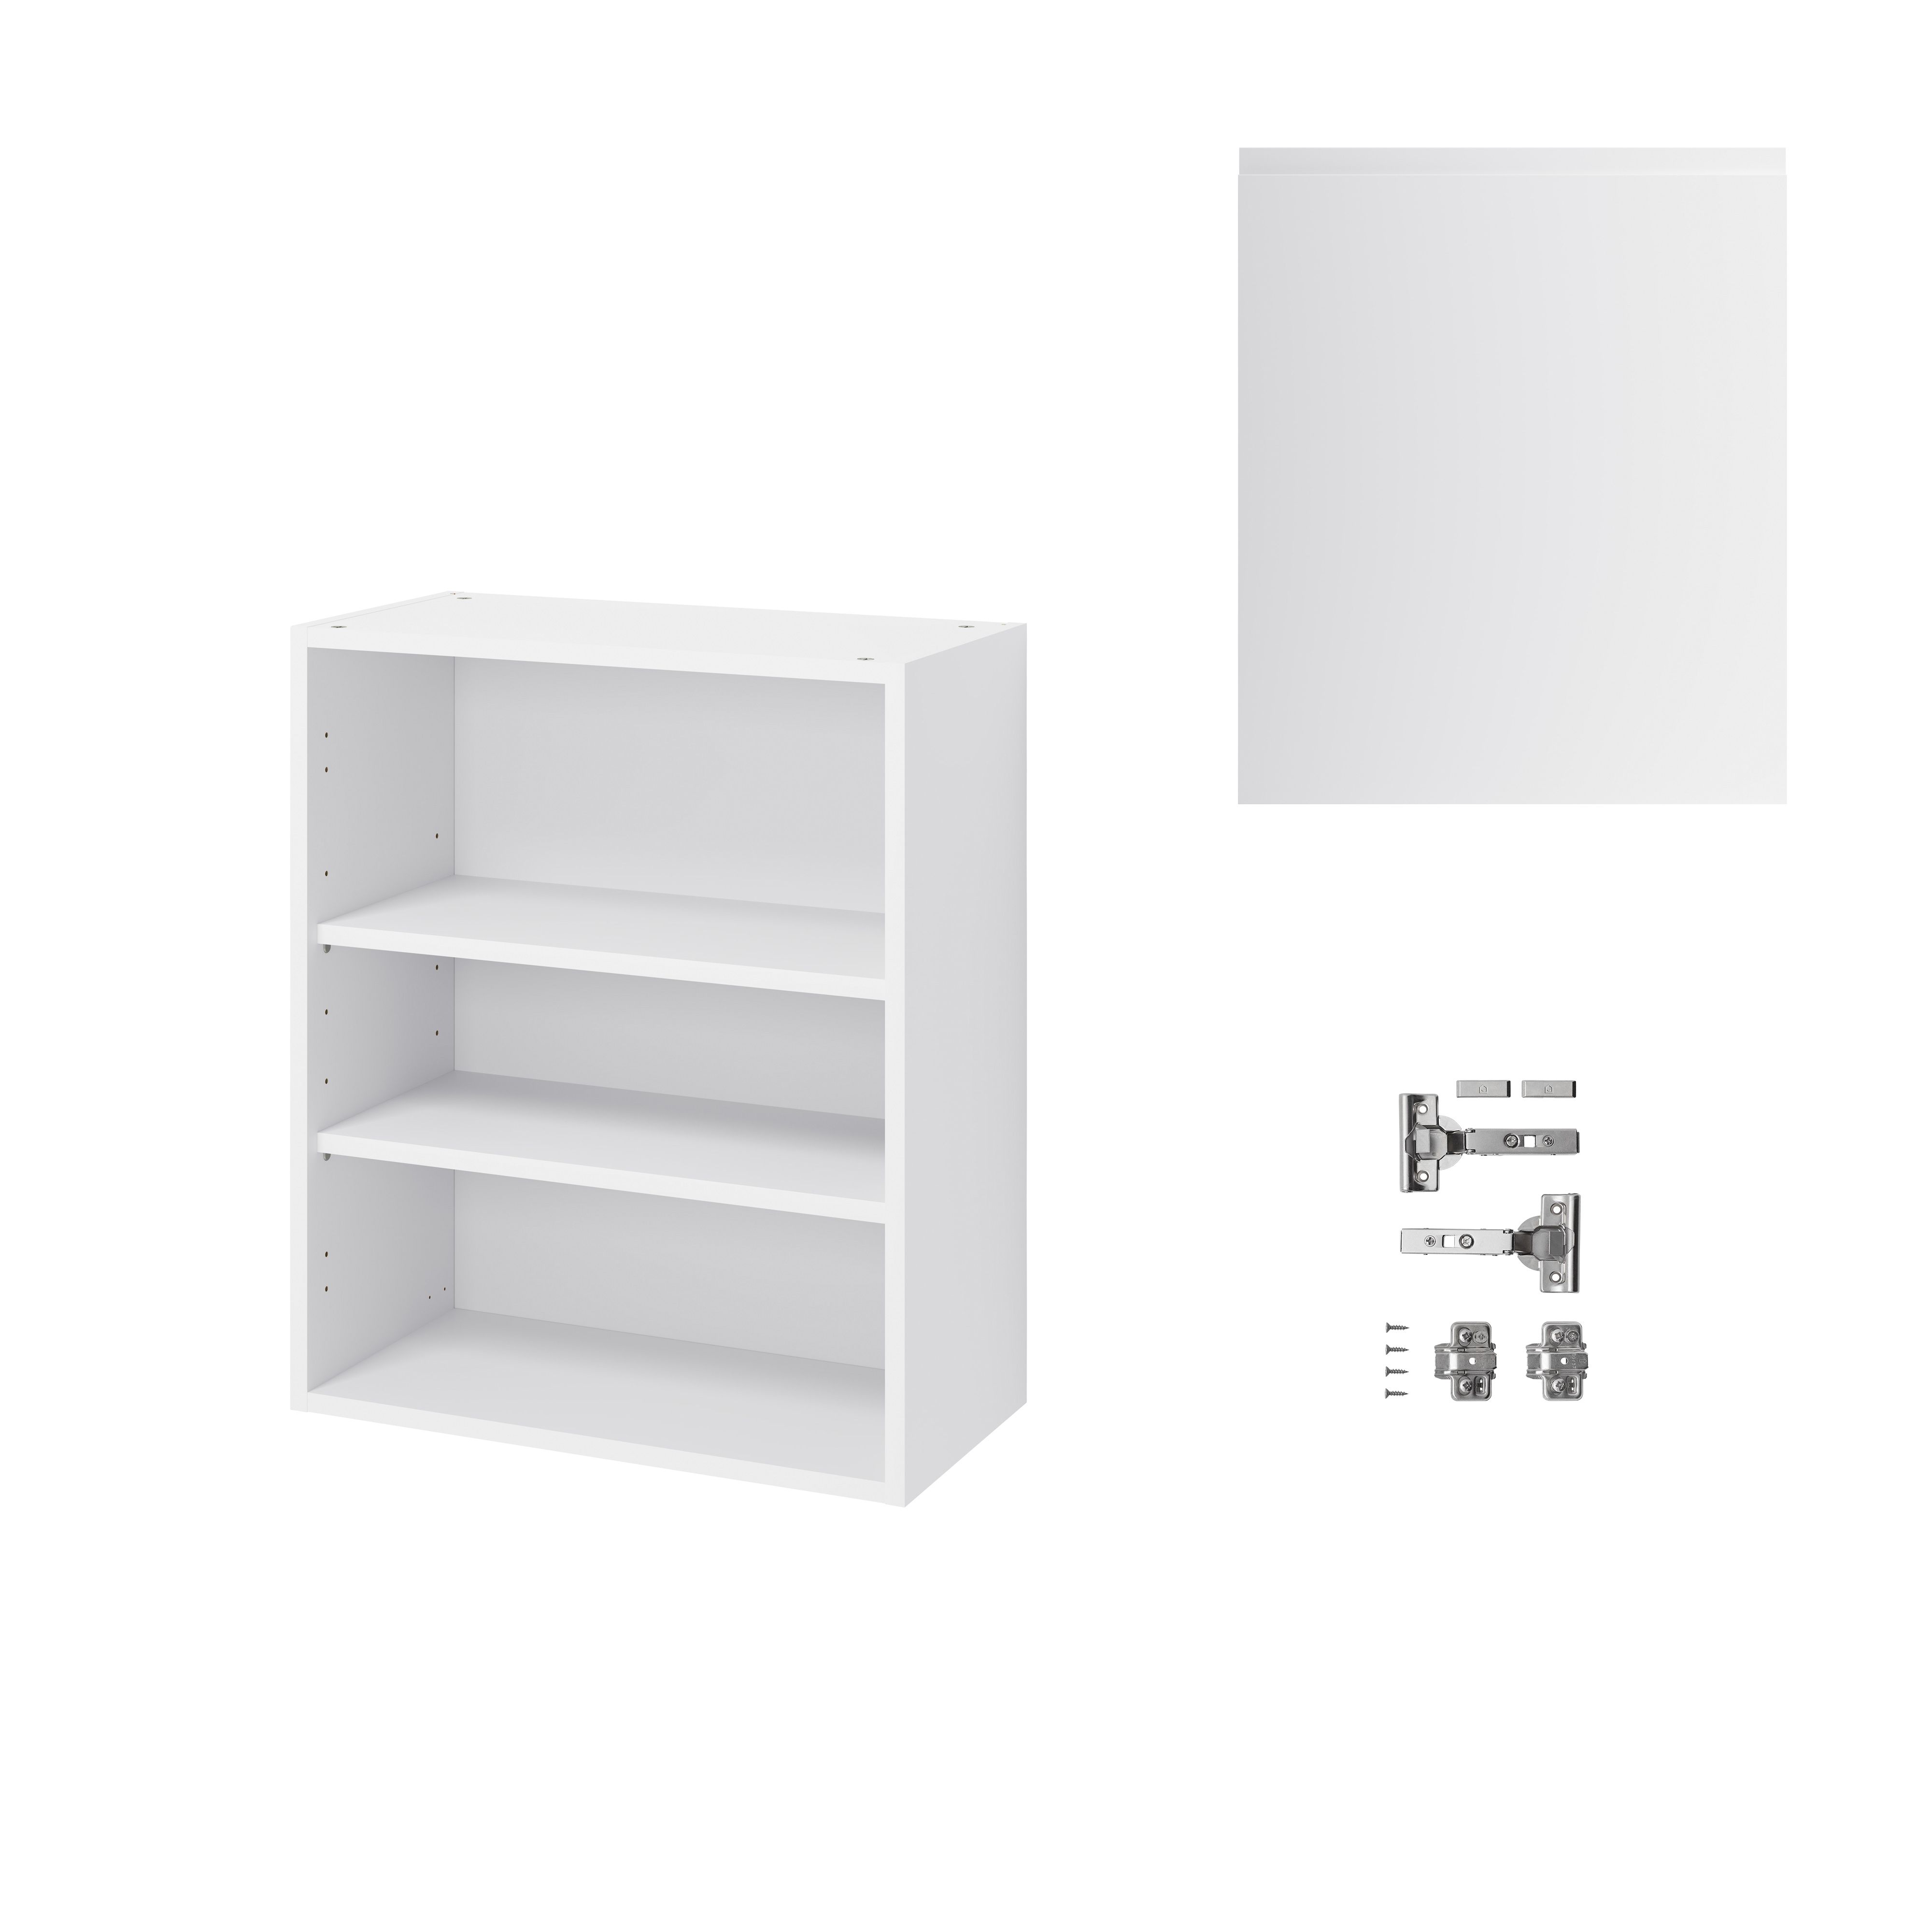 GoodHome Garcinia Gloss light grey integrated handle Wall Kitchen cabinet (W)600mm (H)720mm